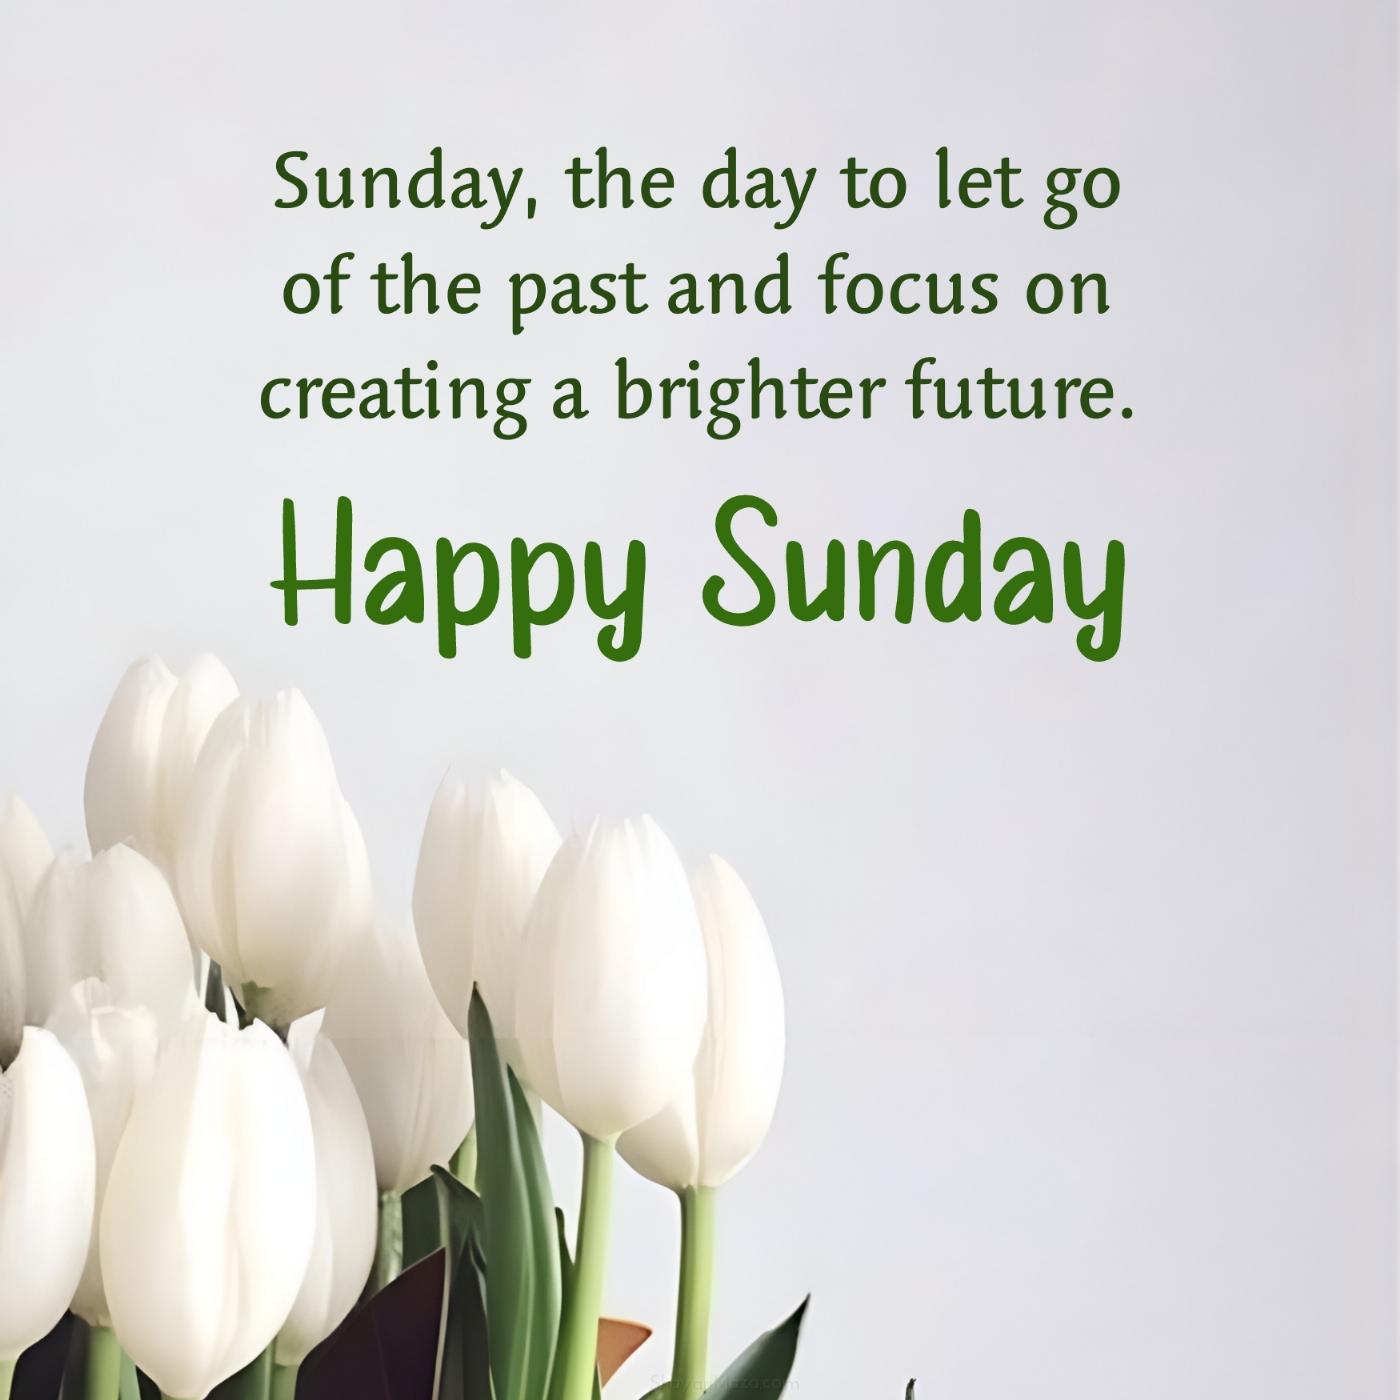 Sunday the day to let go of the past and focus on creating